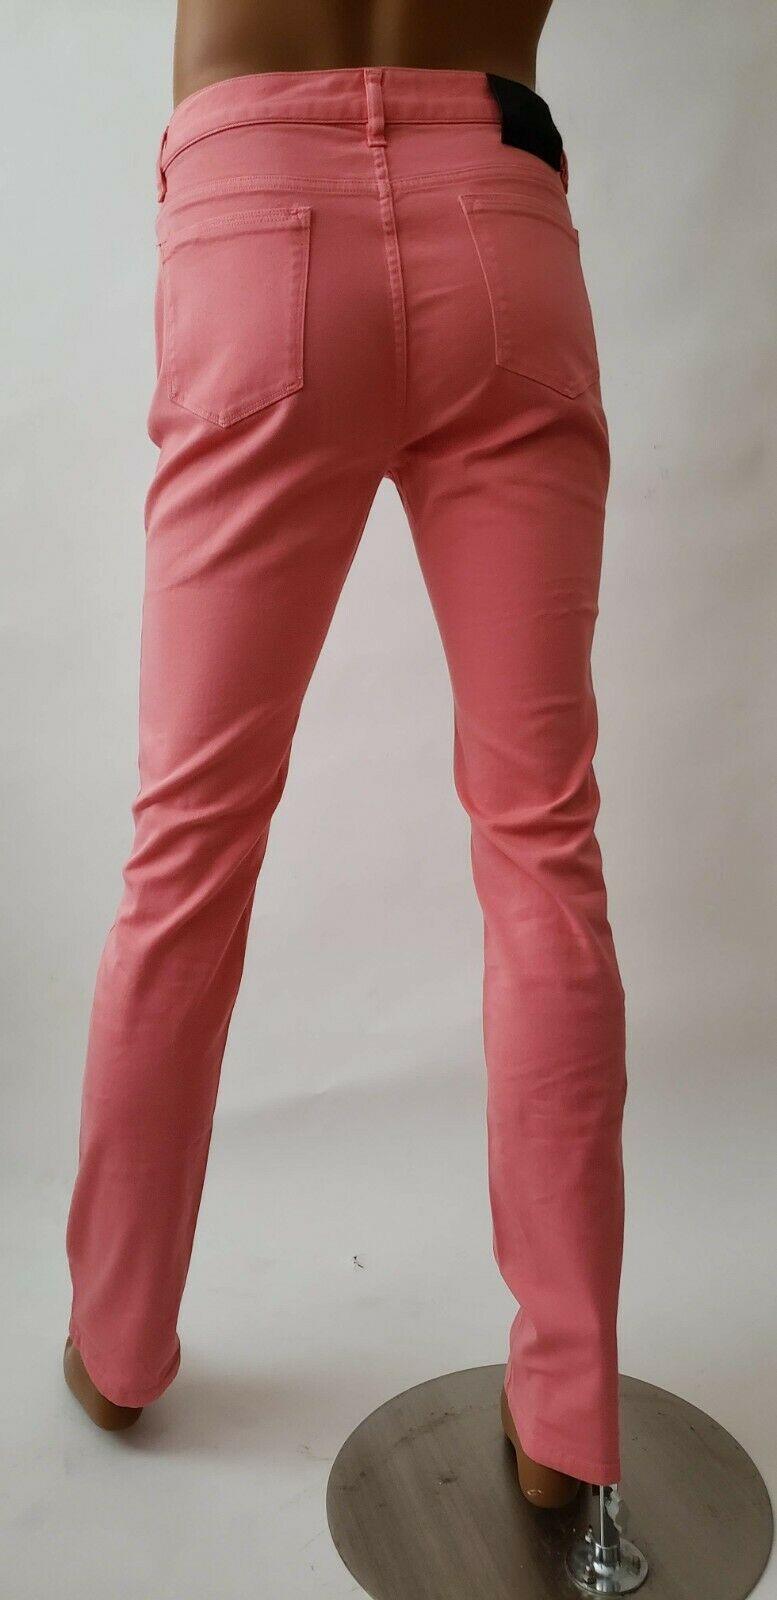 VILEBREQUIN  Men's Classic Slim Straight Fit Jeans Coral  Size 54 - SVNYFancy